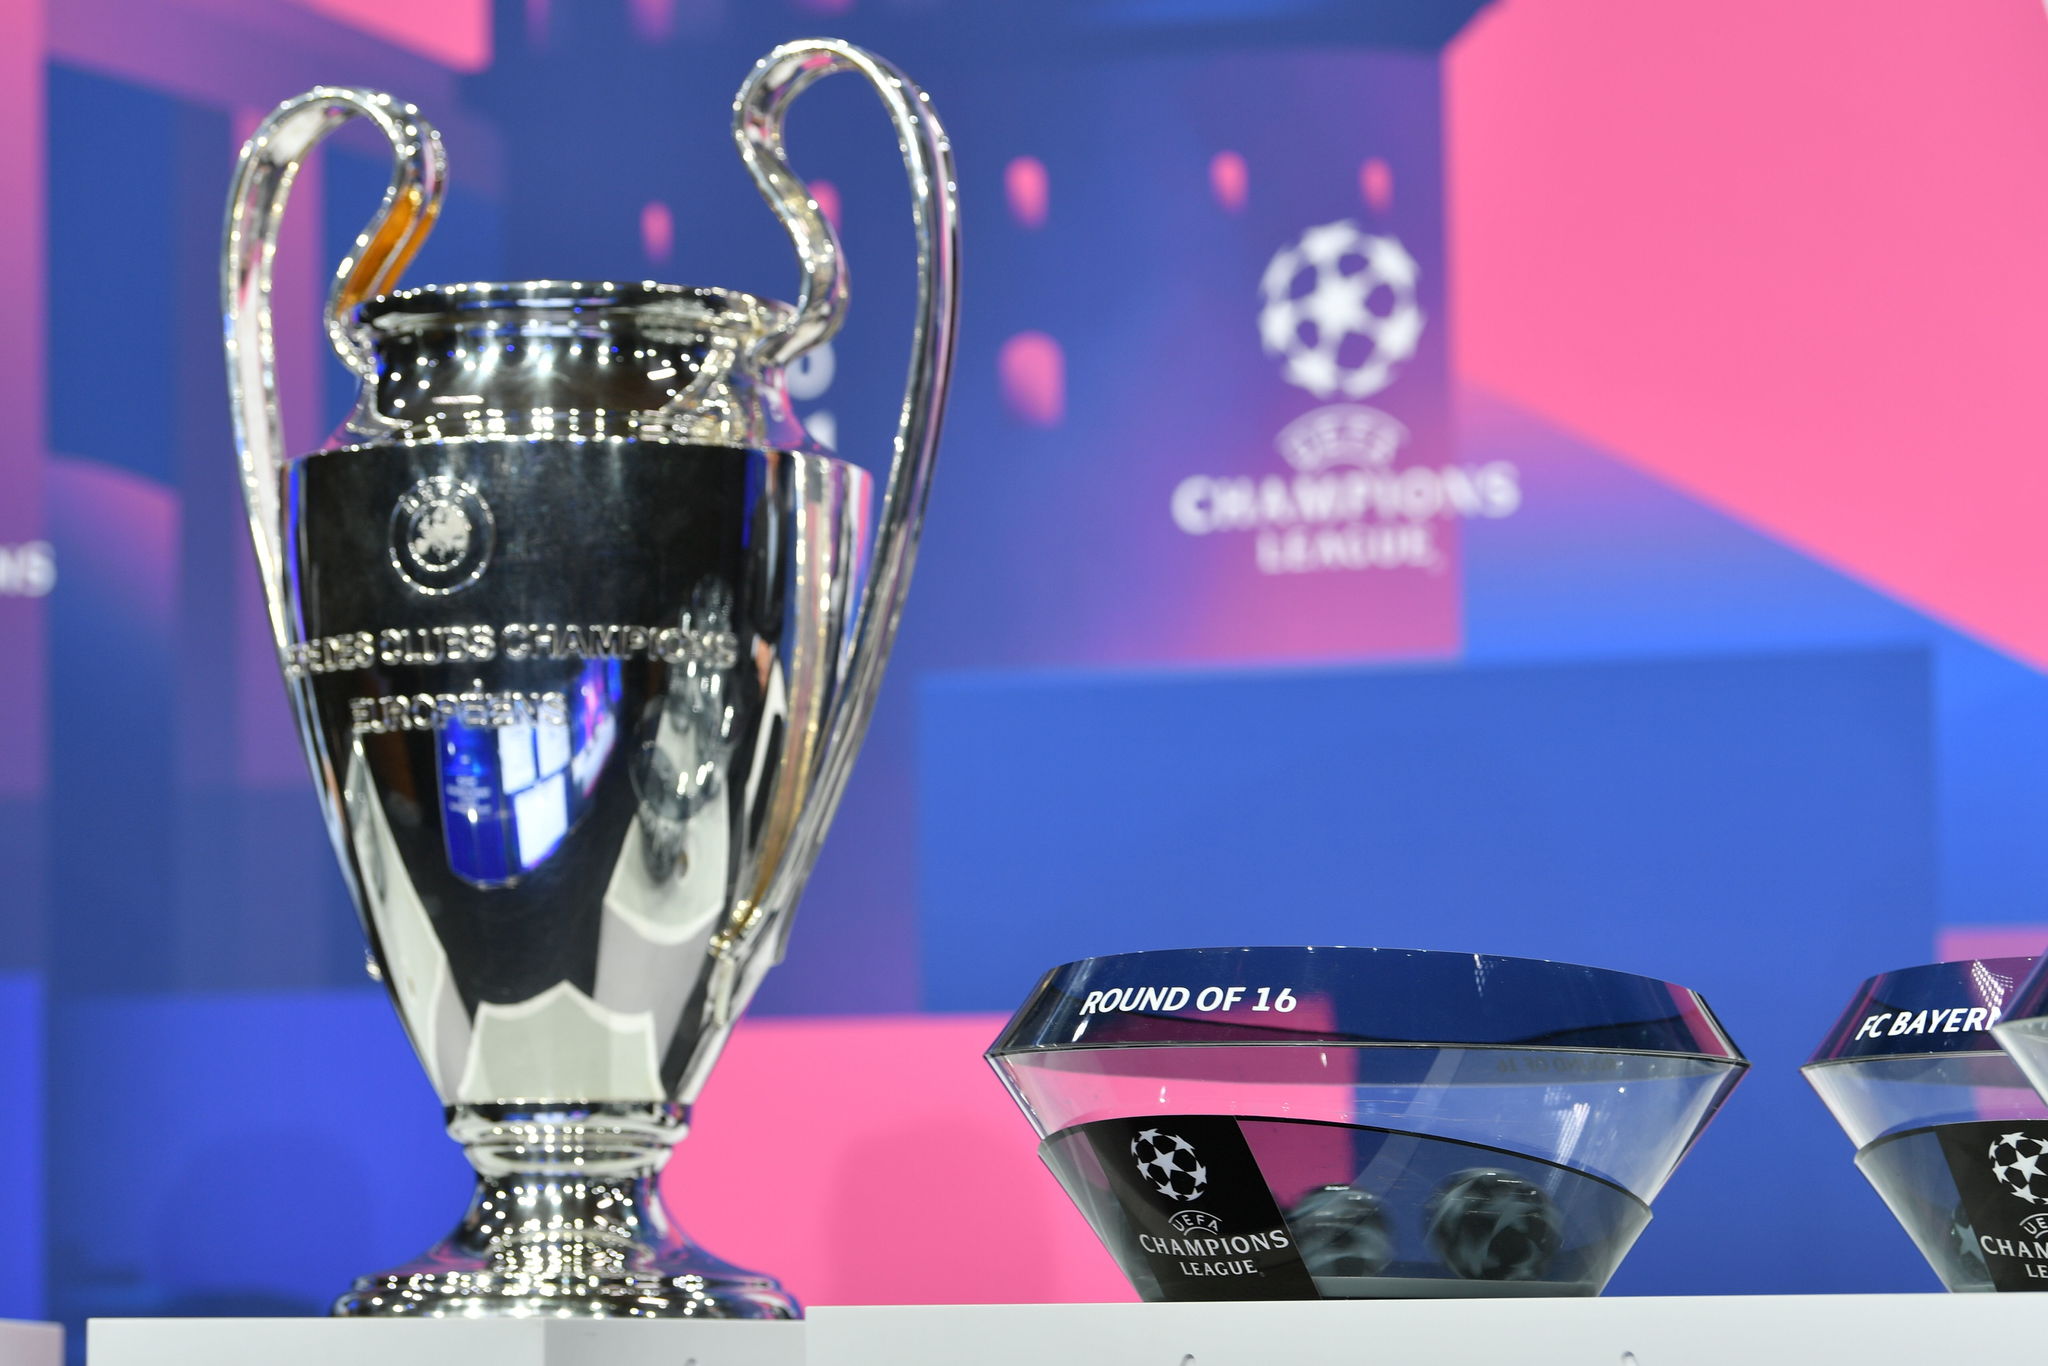 The Champions League draw has been declared void and will be “entirely redone” at 14:00 GMT.